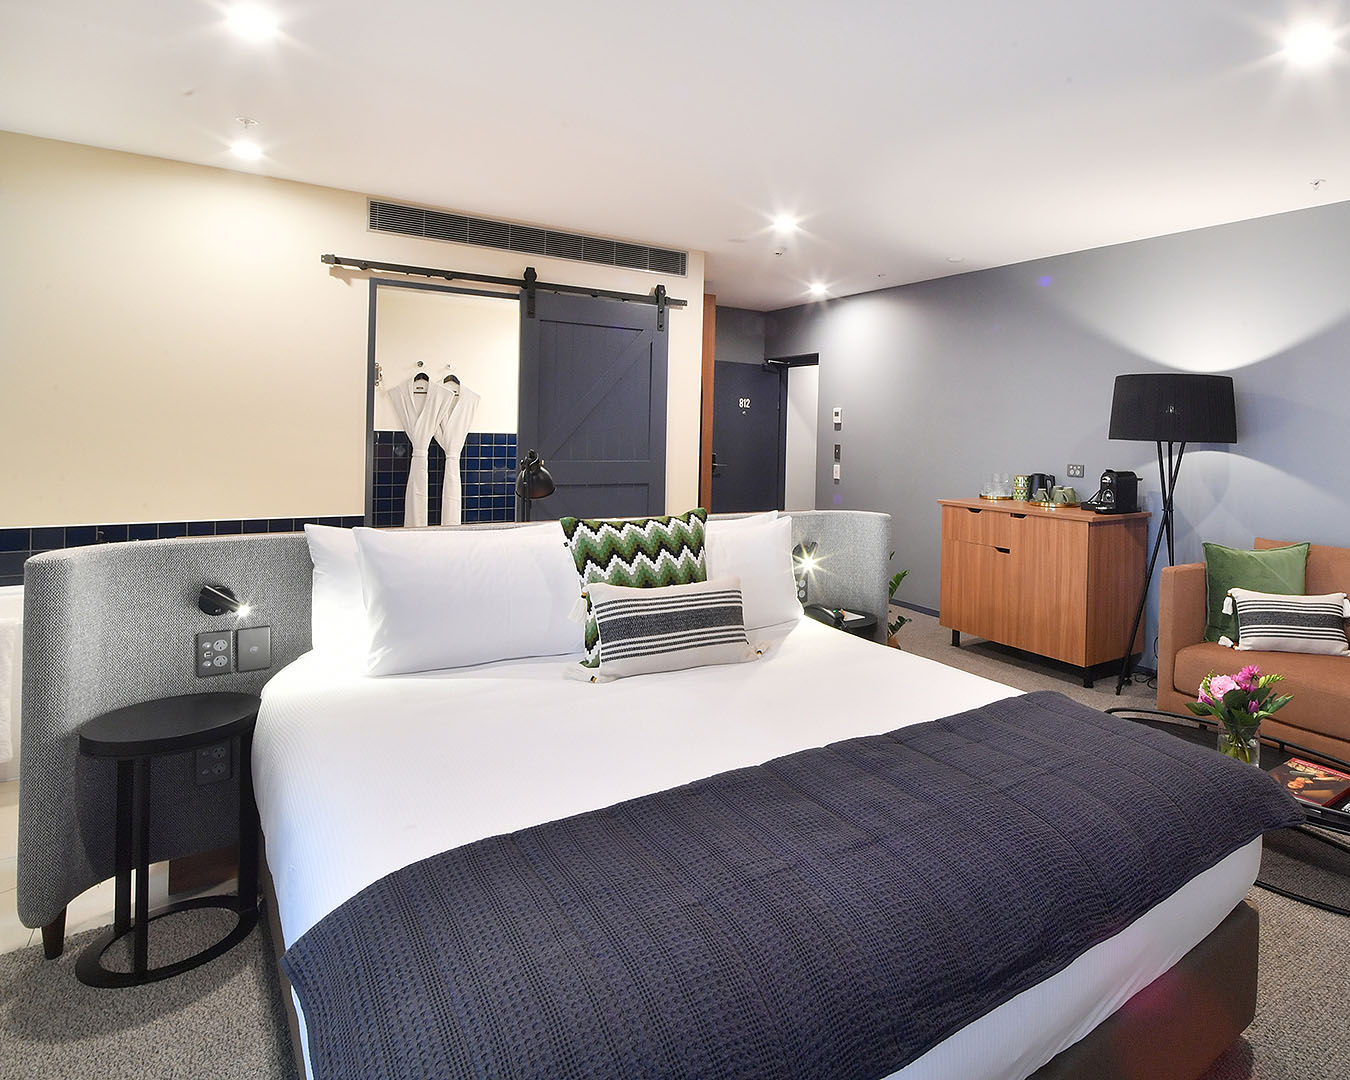 A Sudima hotel room suite, one of the best hotels in Auckland.